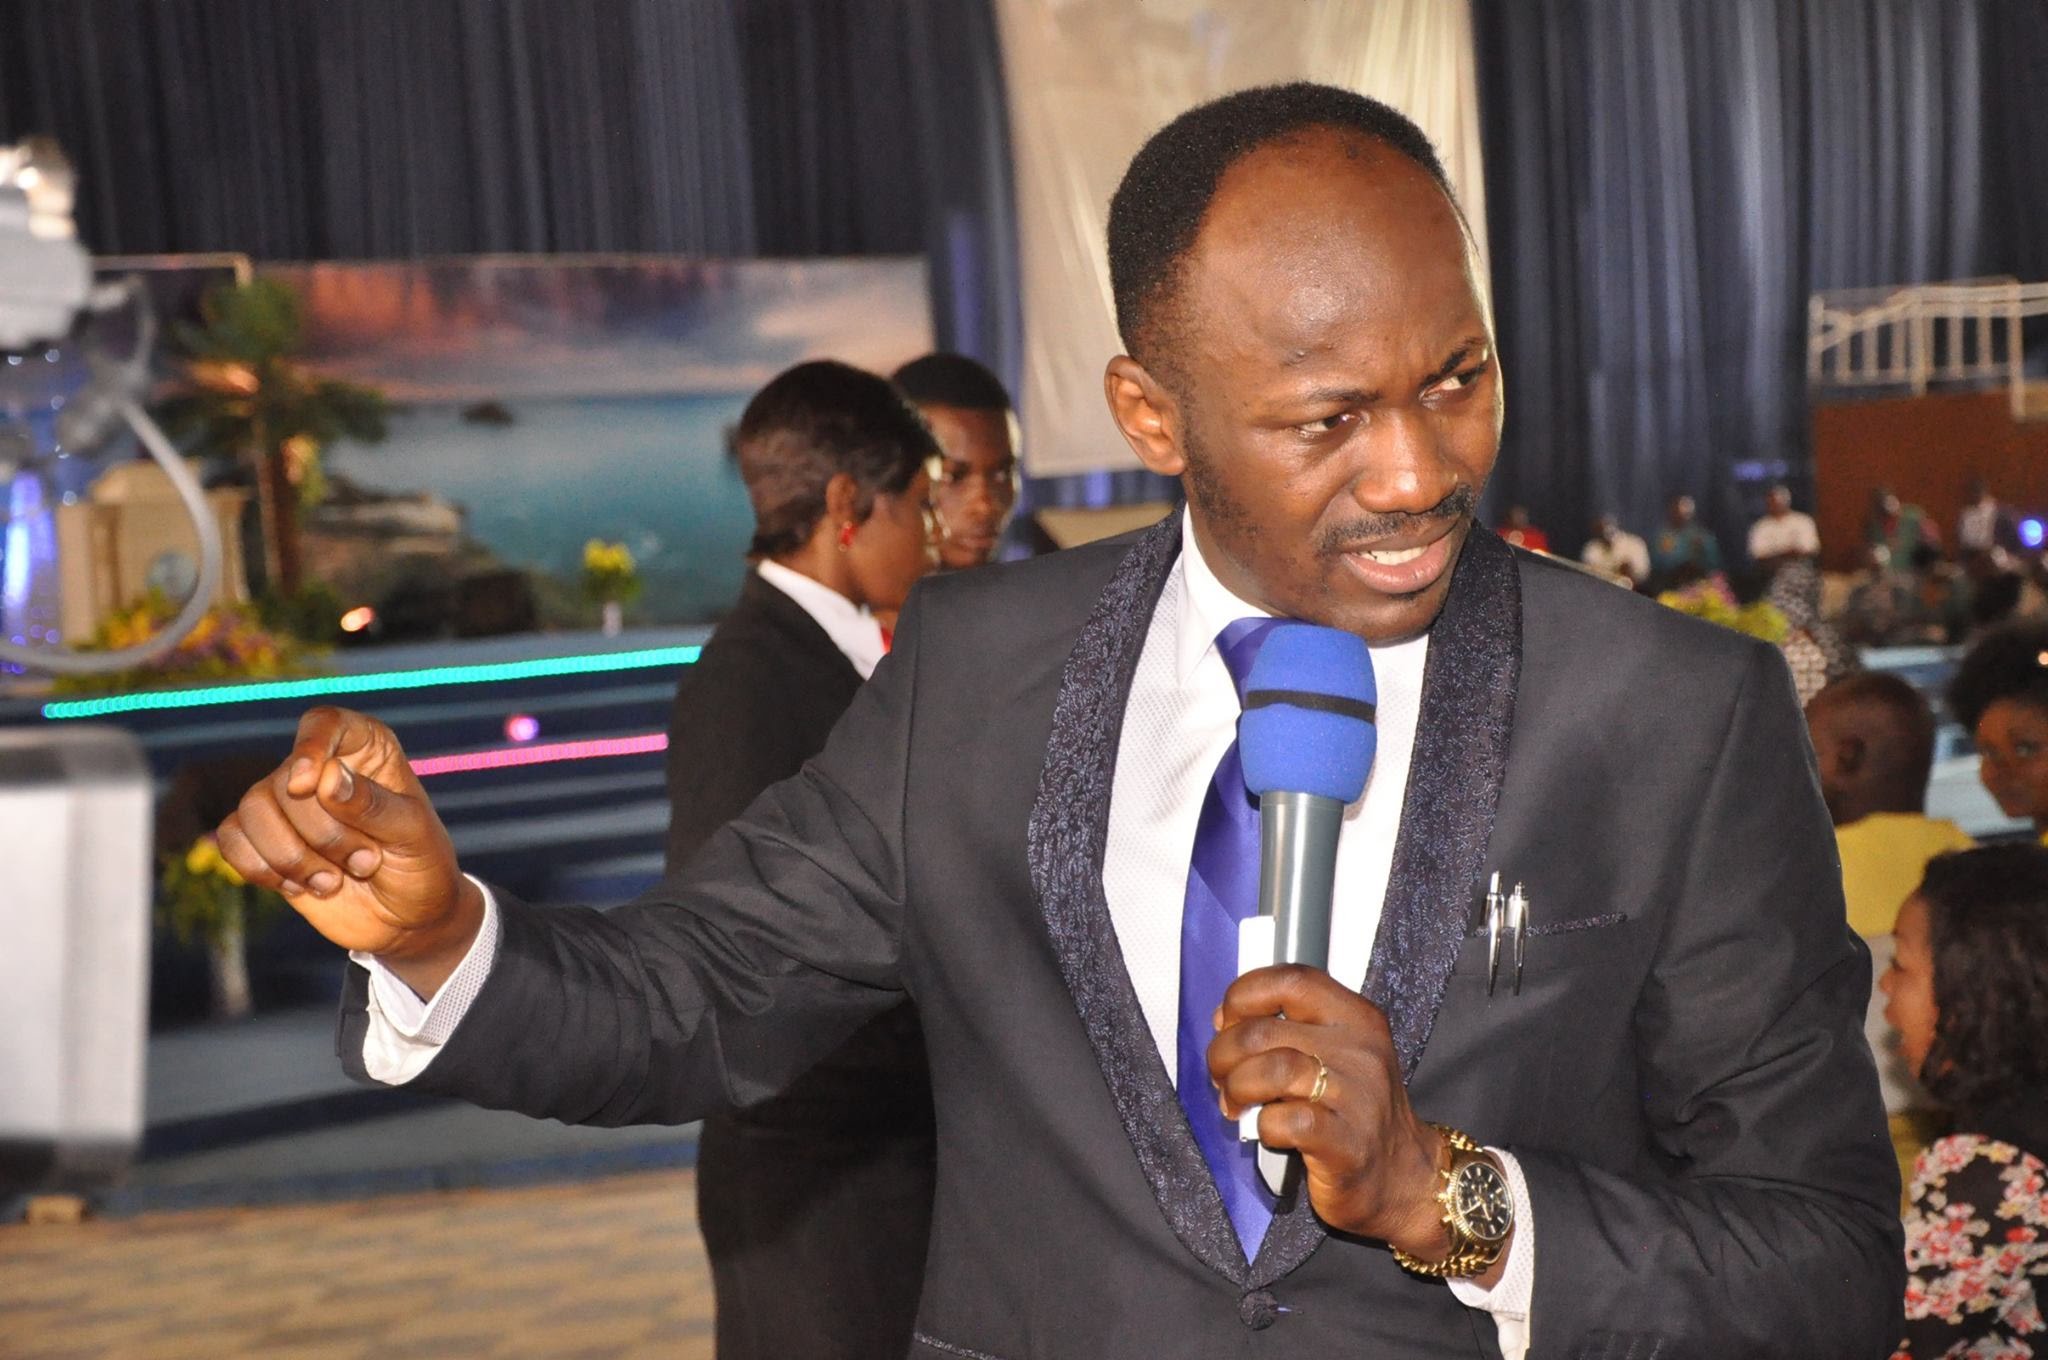 Apostle Johnson Suleman, general overseer of Omega Fire MInistries